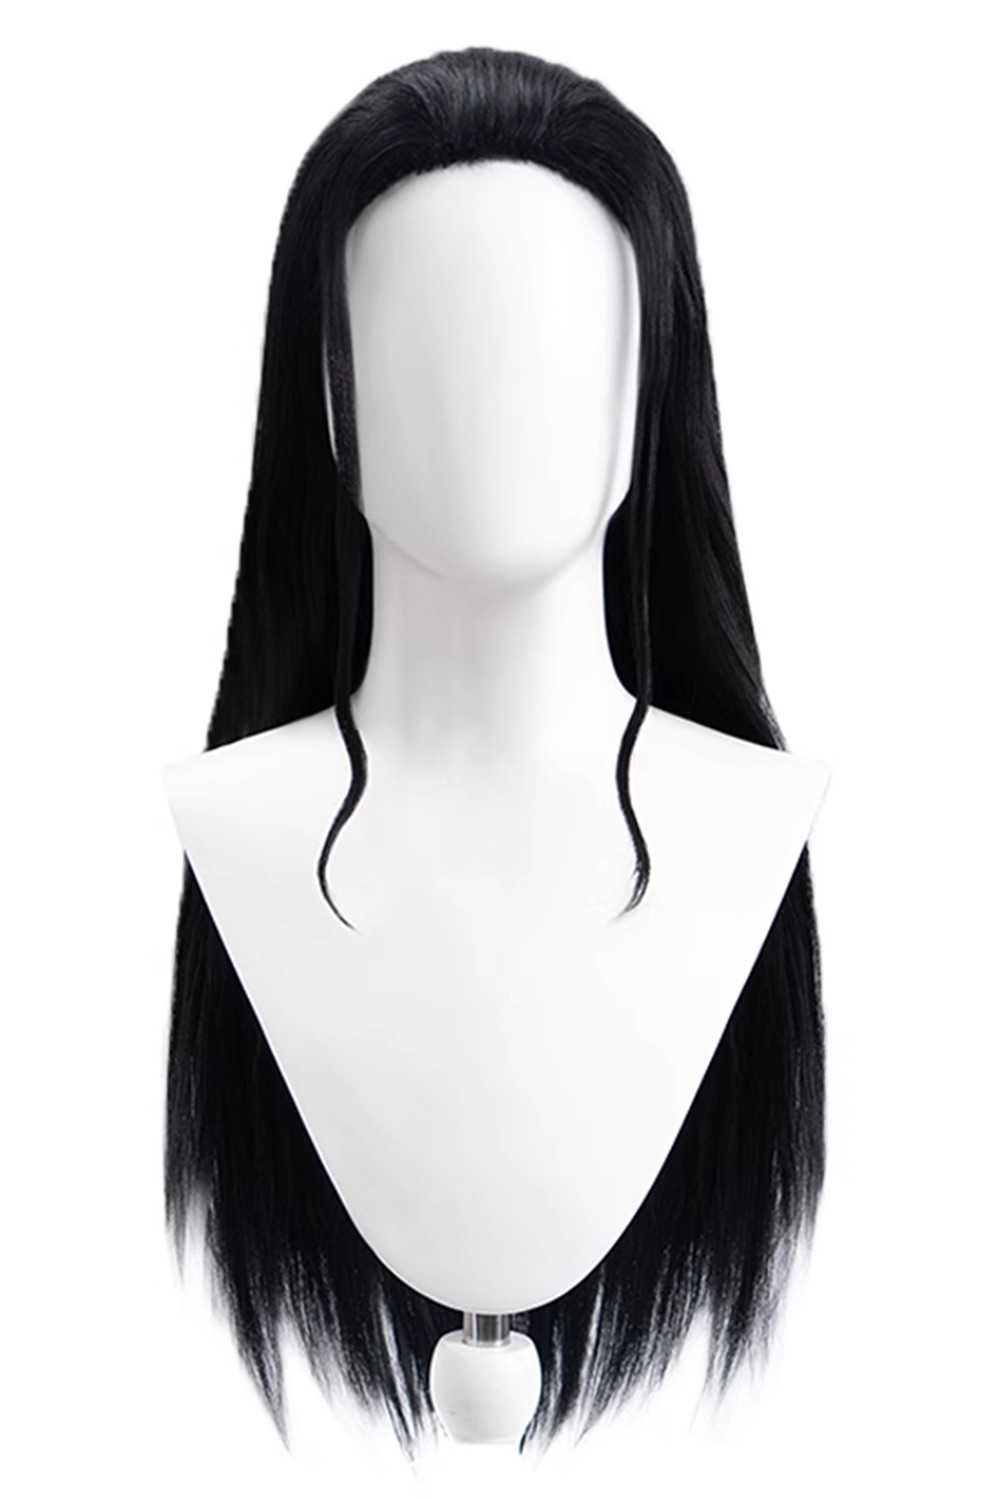 Anime One Piece Nico Robin Cosplay Wig Heat Resistant Synthetic Hair Halloween Costume Accessories